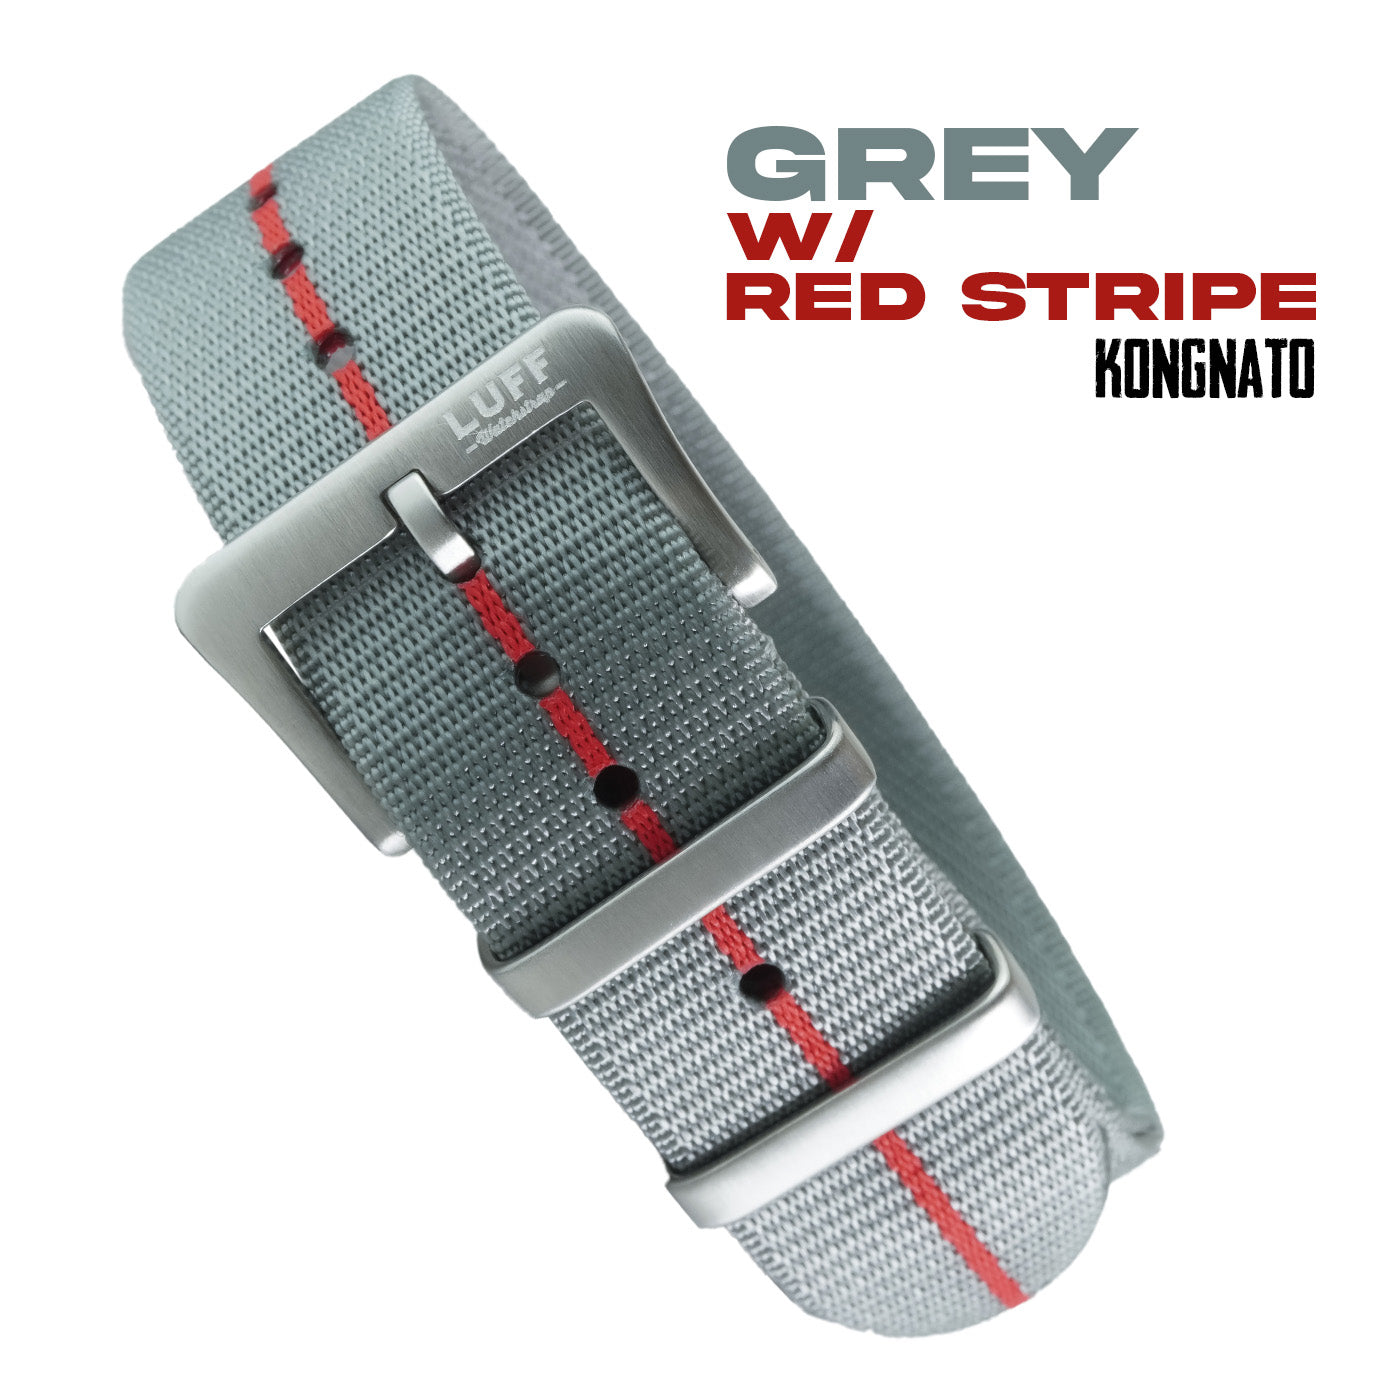 Grey with Red Stripe 20mm - KongNato (6906634797143)